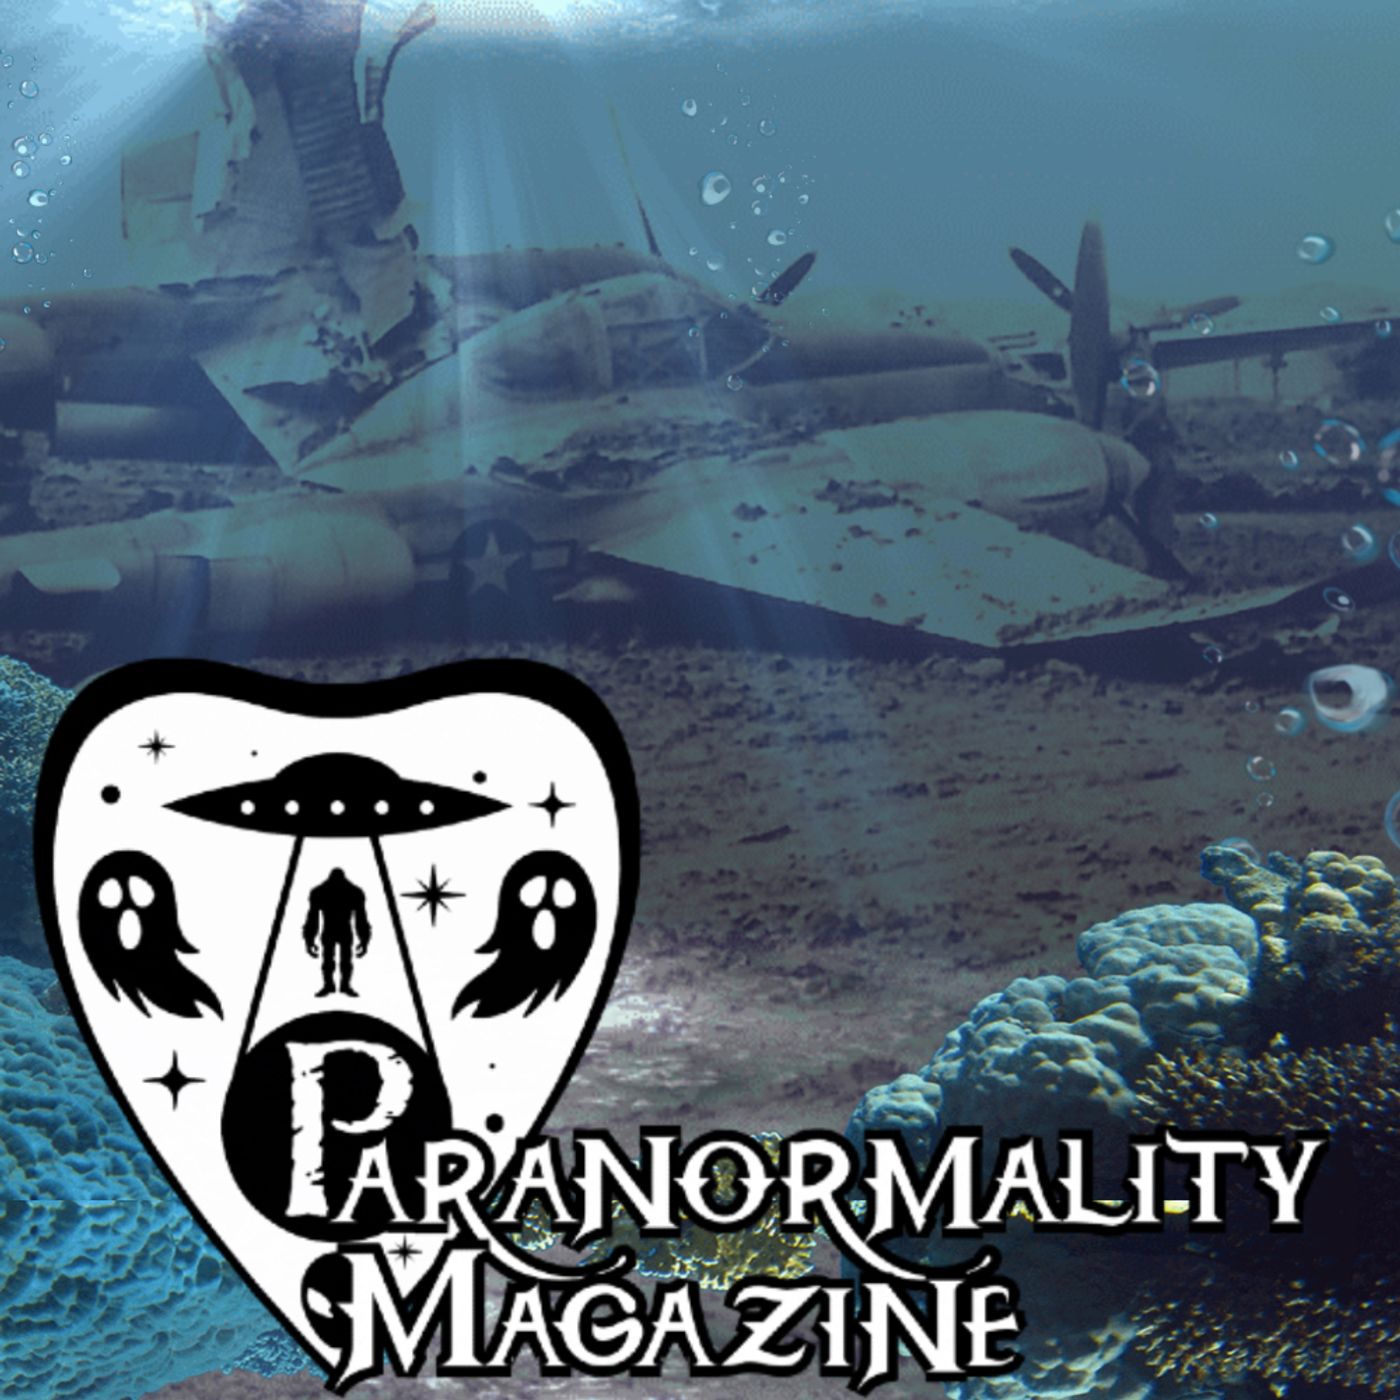 “WAS HE ABDUCTED FROM HIS COCKPIT?” and More Fortean-Related Stories! #ParanormalityMag